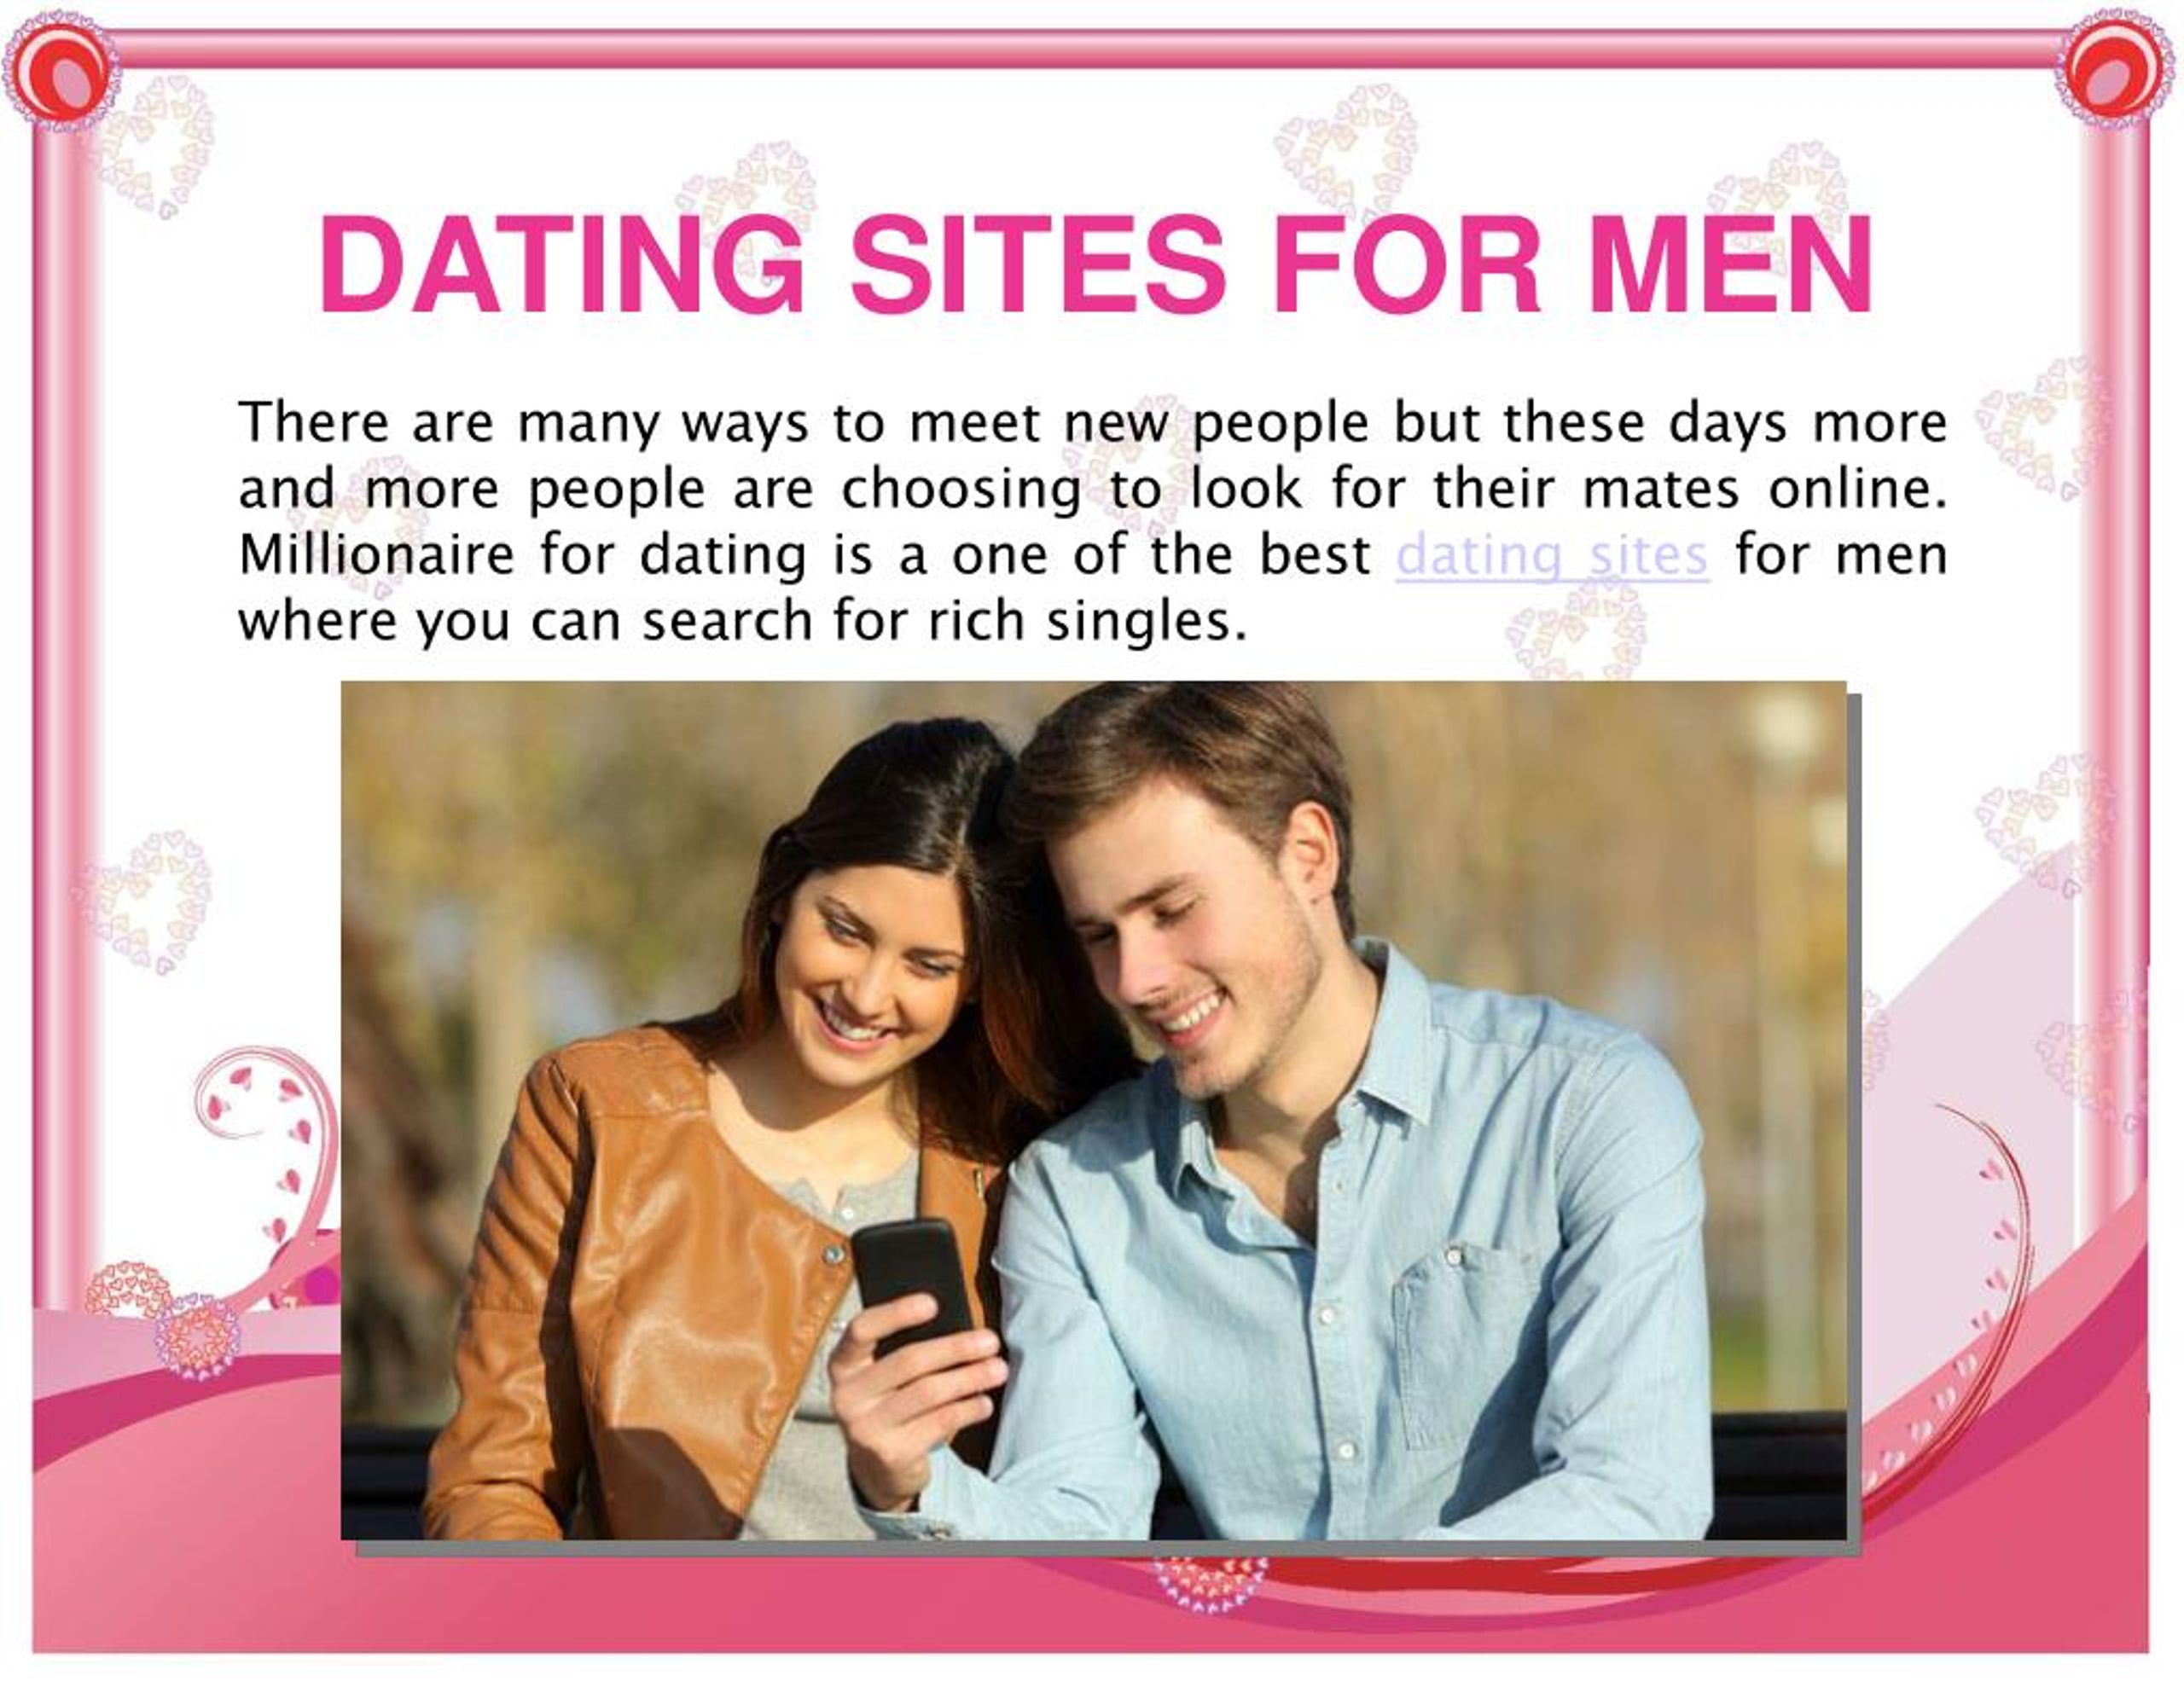 The best dating sites